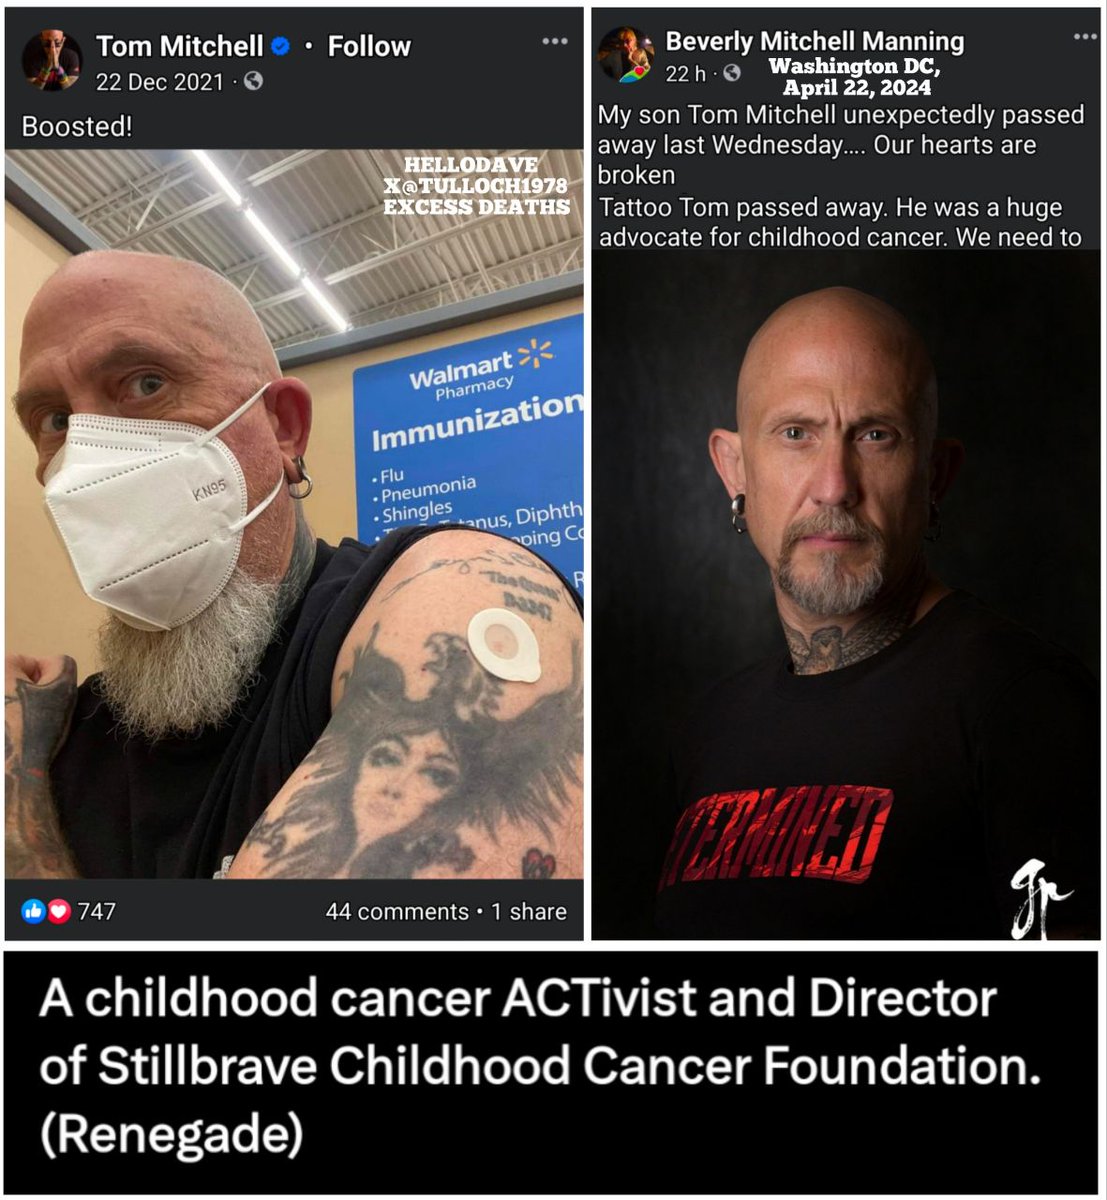 Washington DC, Tattoo Tom, Childhood Cancer Activist, died suddenly (April 2024) 'Boosted'

'My son Tom Mitchell unexpectedly passed away last Wednesday…. Our hearts are broken.'